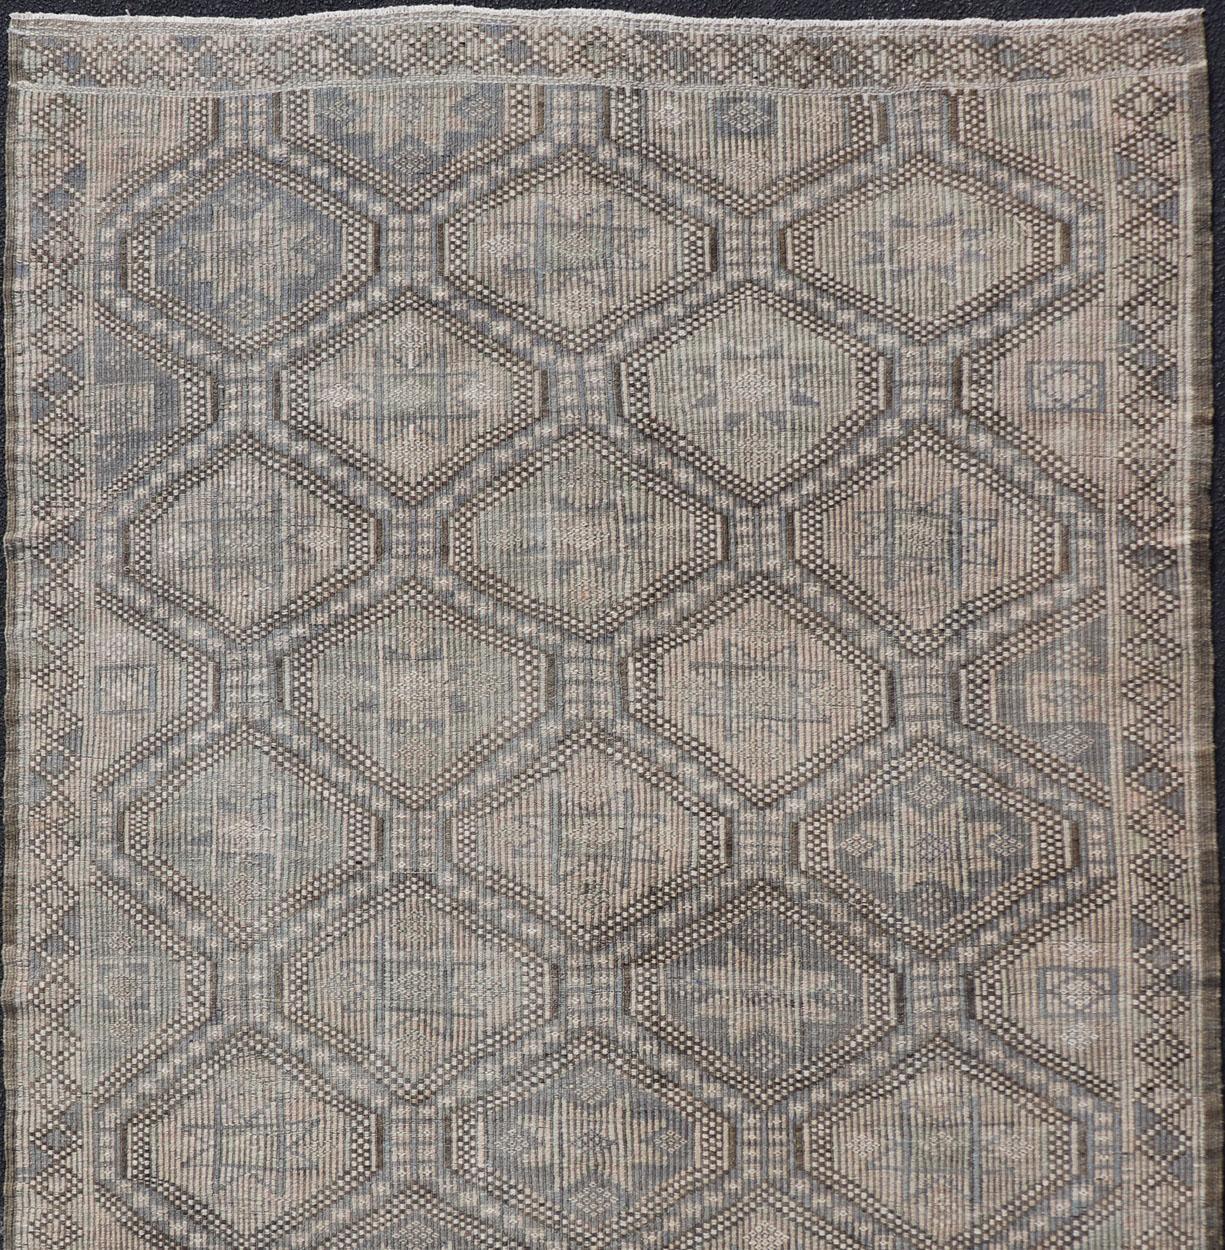 Hand-Woven Vintage Turkish Embroidered Flat-Weave Rug with Geometric Diamond Design For Sale